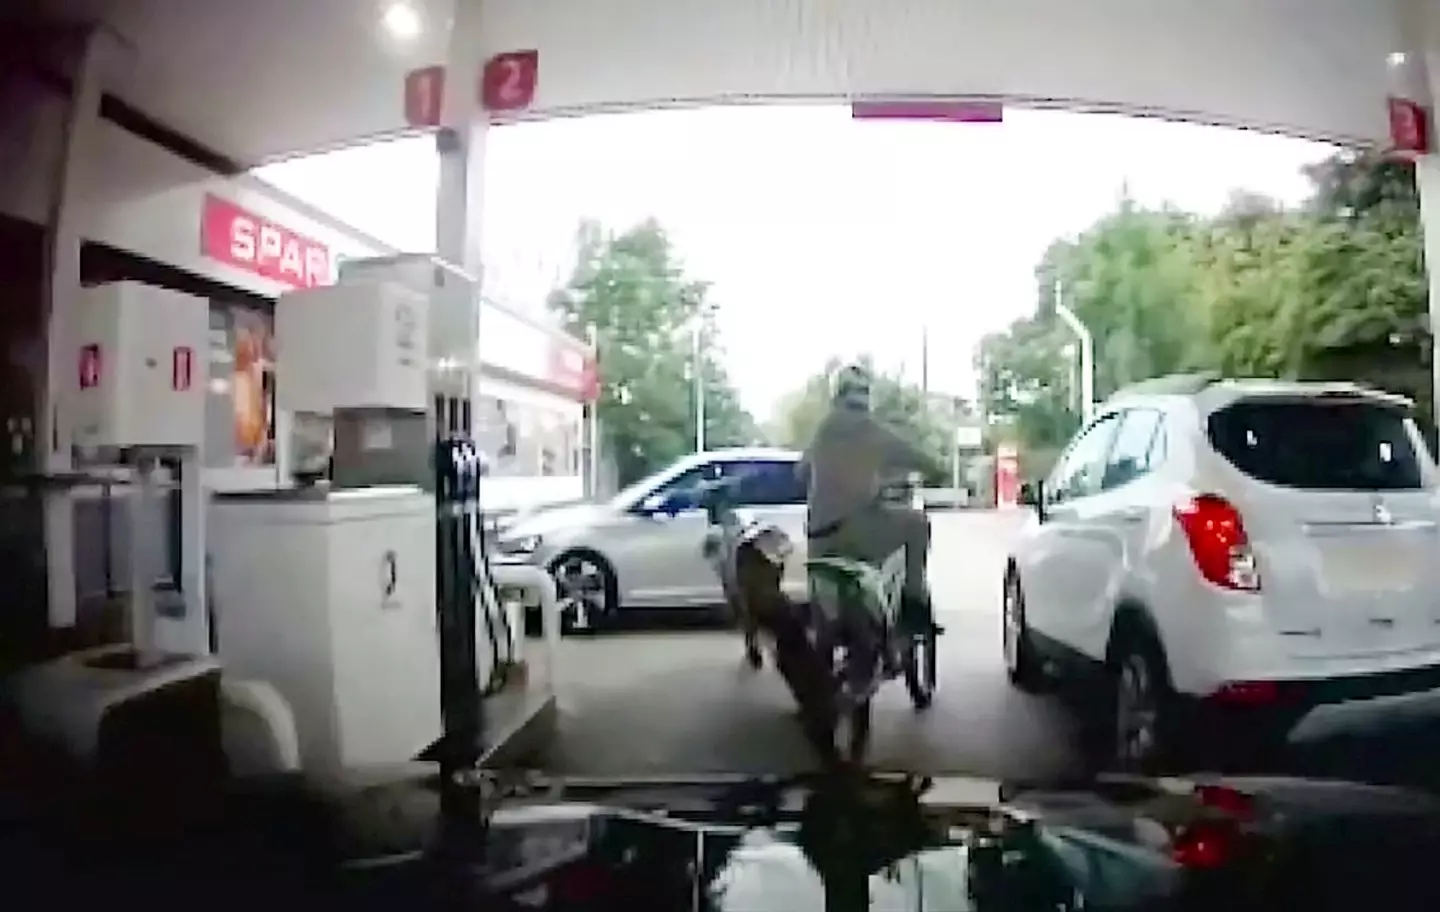 Officers pulled onto the petrol station forecourt in unmarked cars after spotting the bikers.